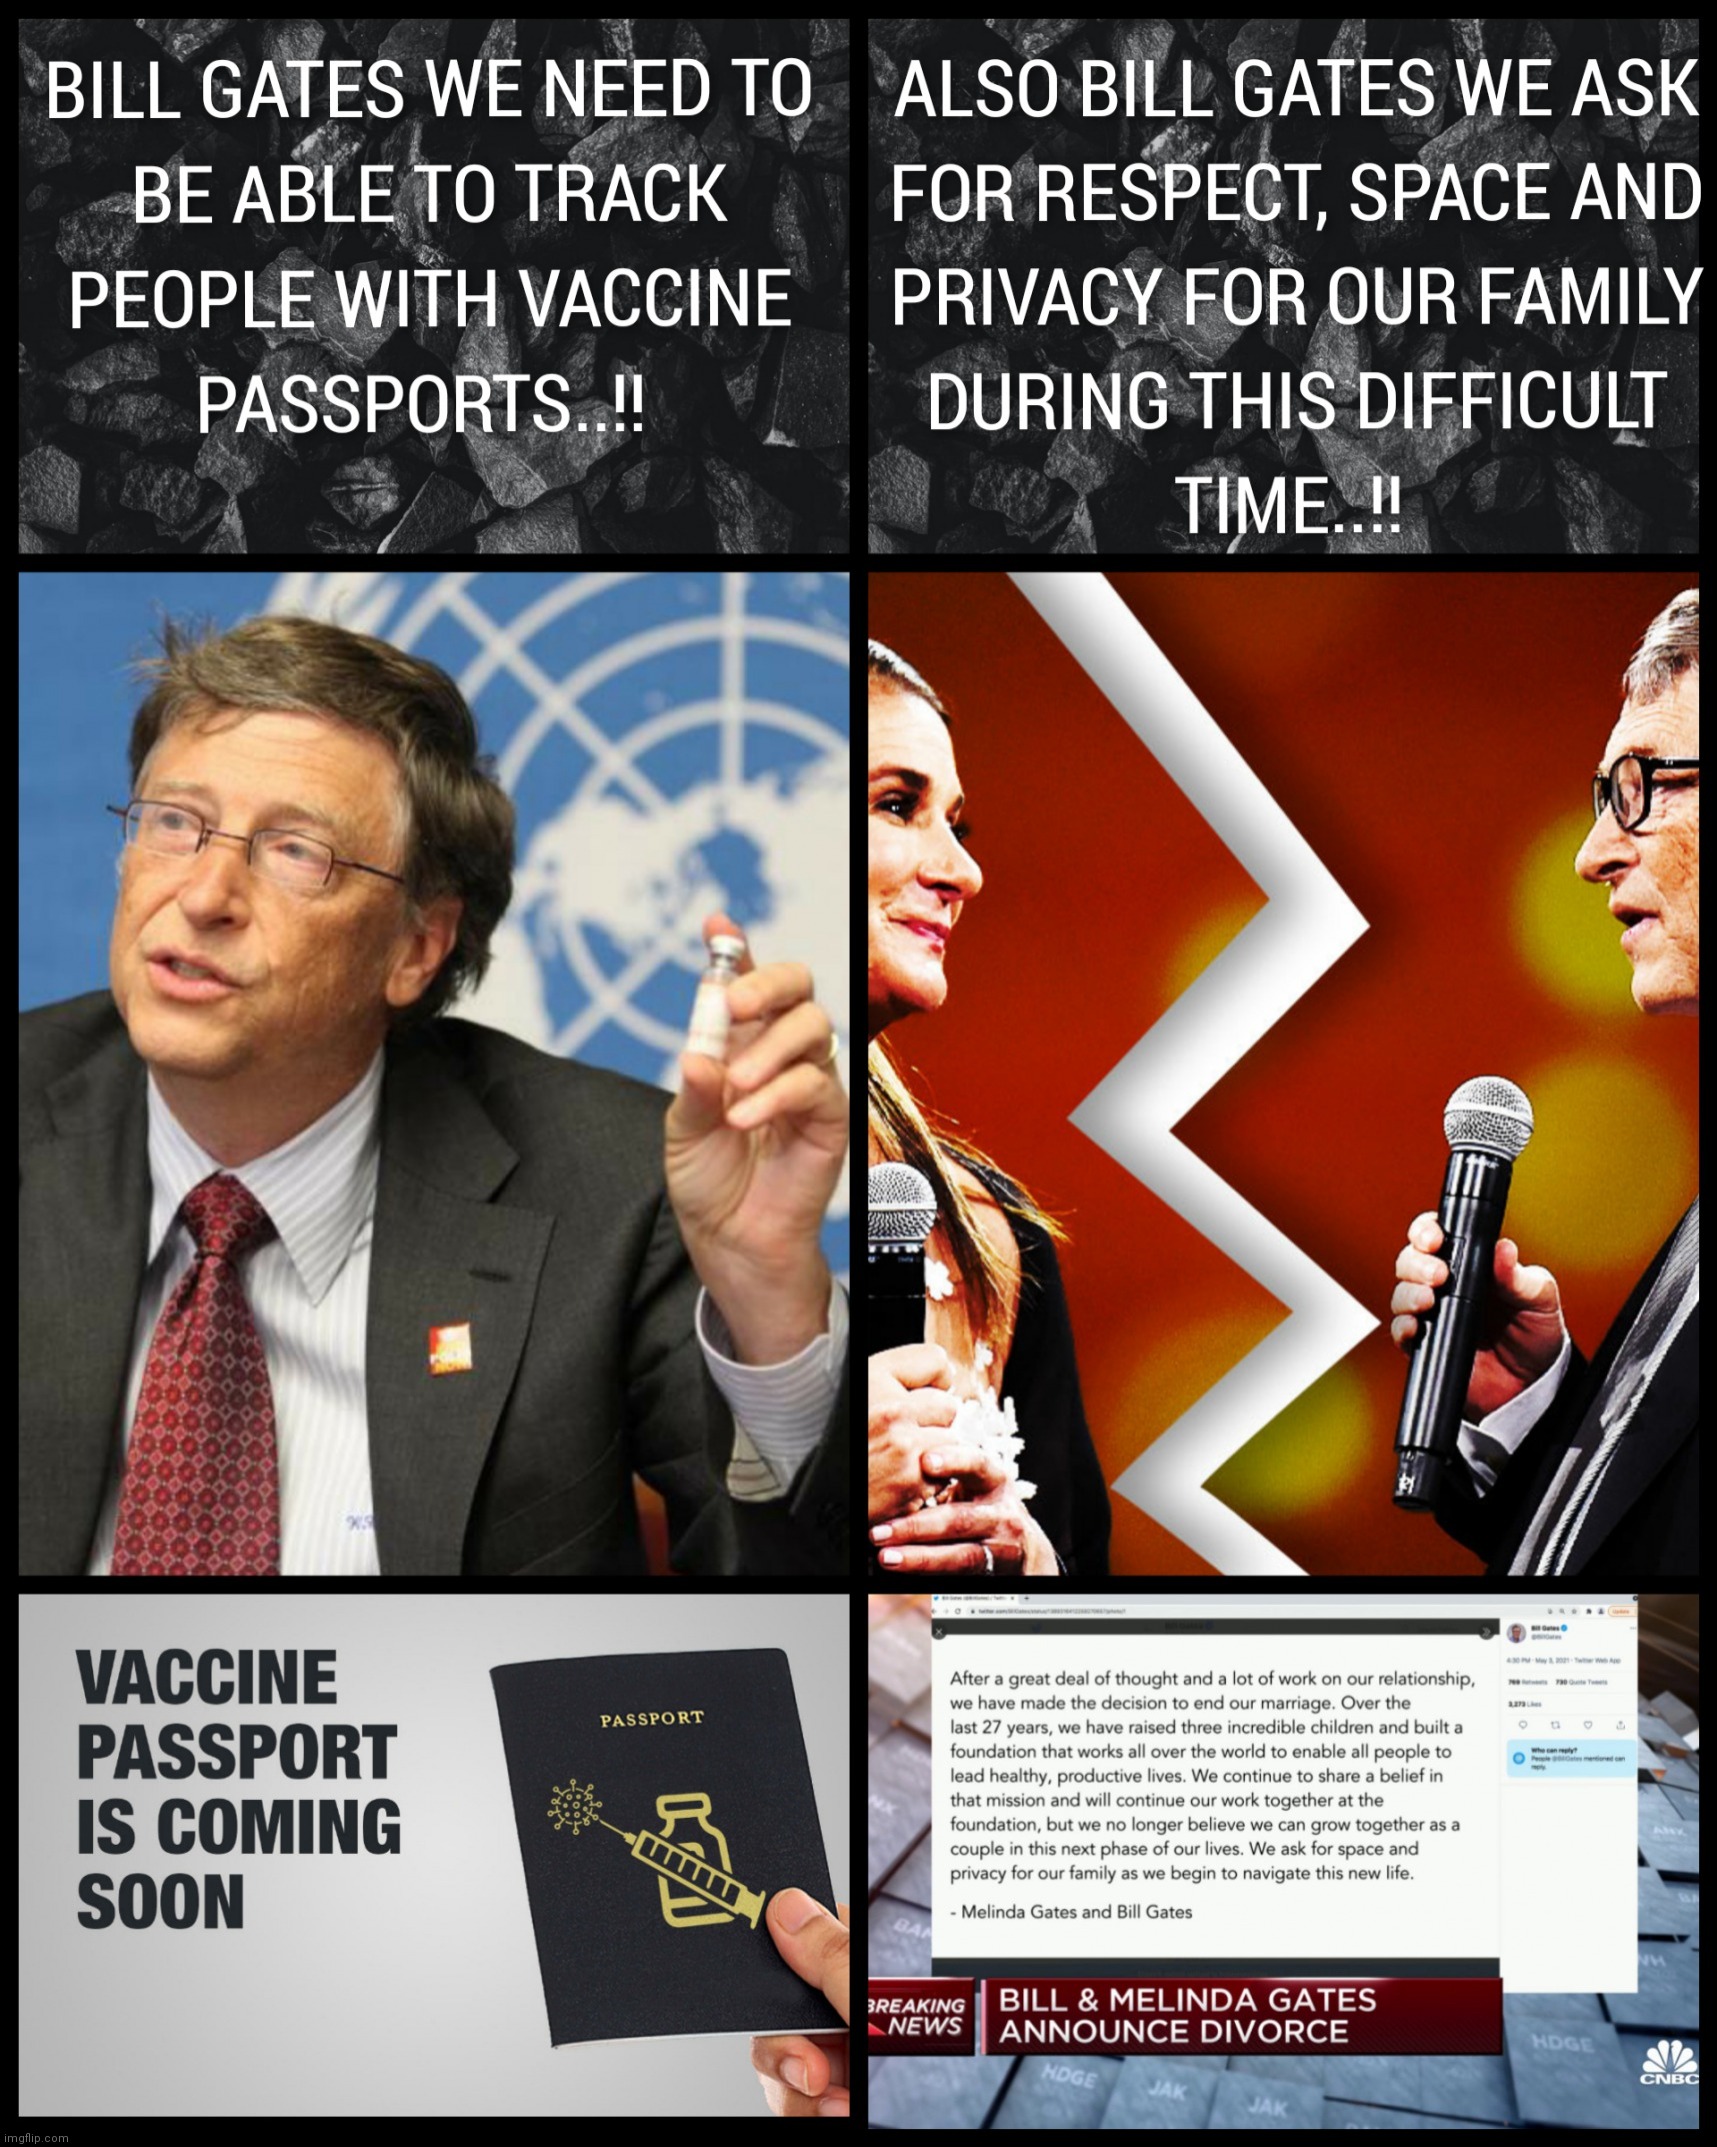 HYPOCRITE ASKS FOR RESPECT, SPACE AND PRIVACY FOR OUR FAMILY DURING THIS DIFFICULT TIME..!! | image tagged in hypocrite,bill gates,covid-19,vaccines,diversity,memes | made w/ Imgflip meme maker